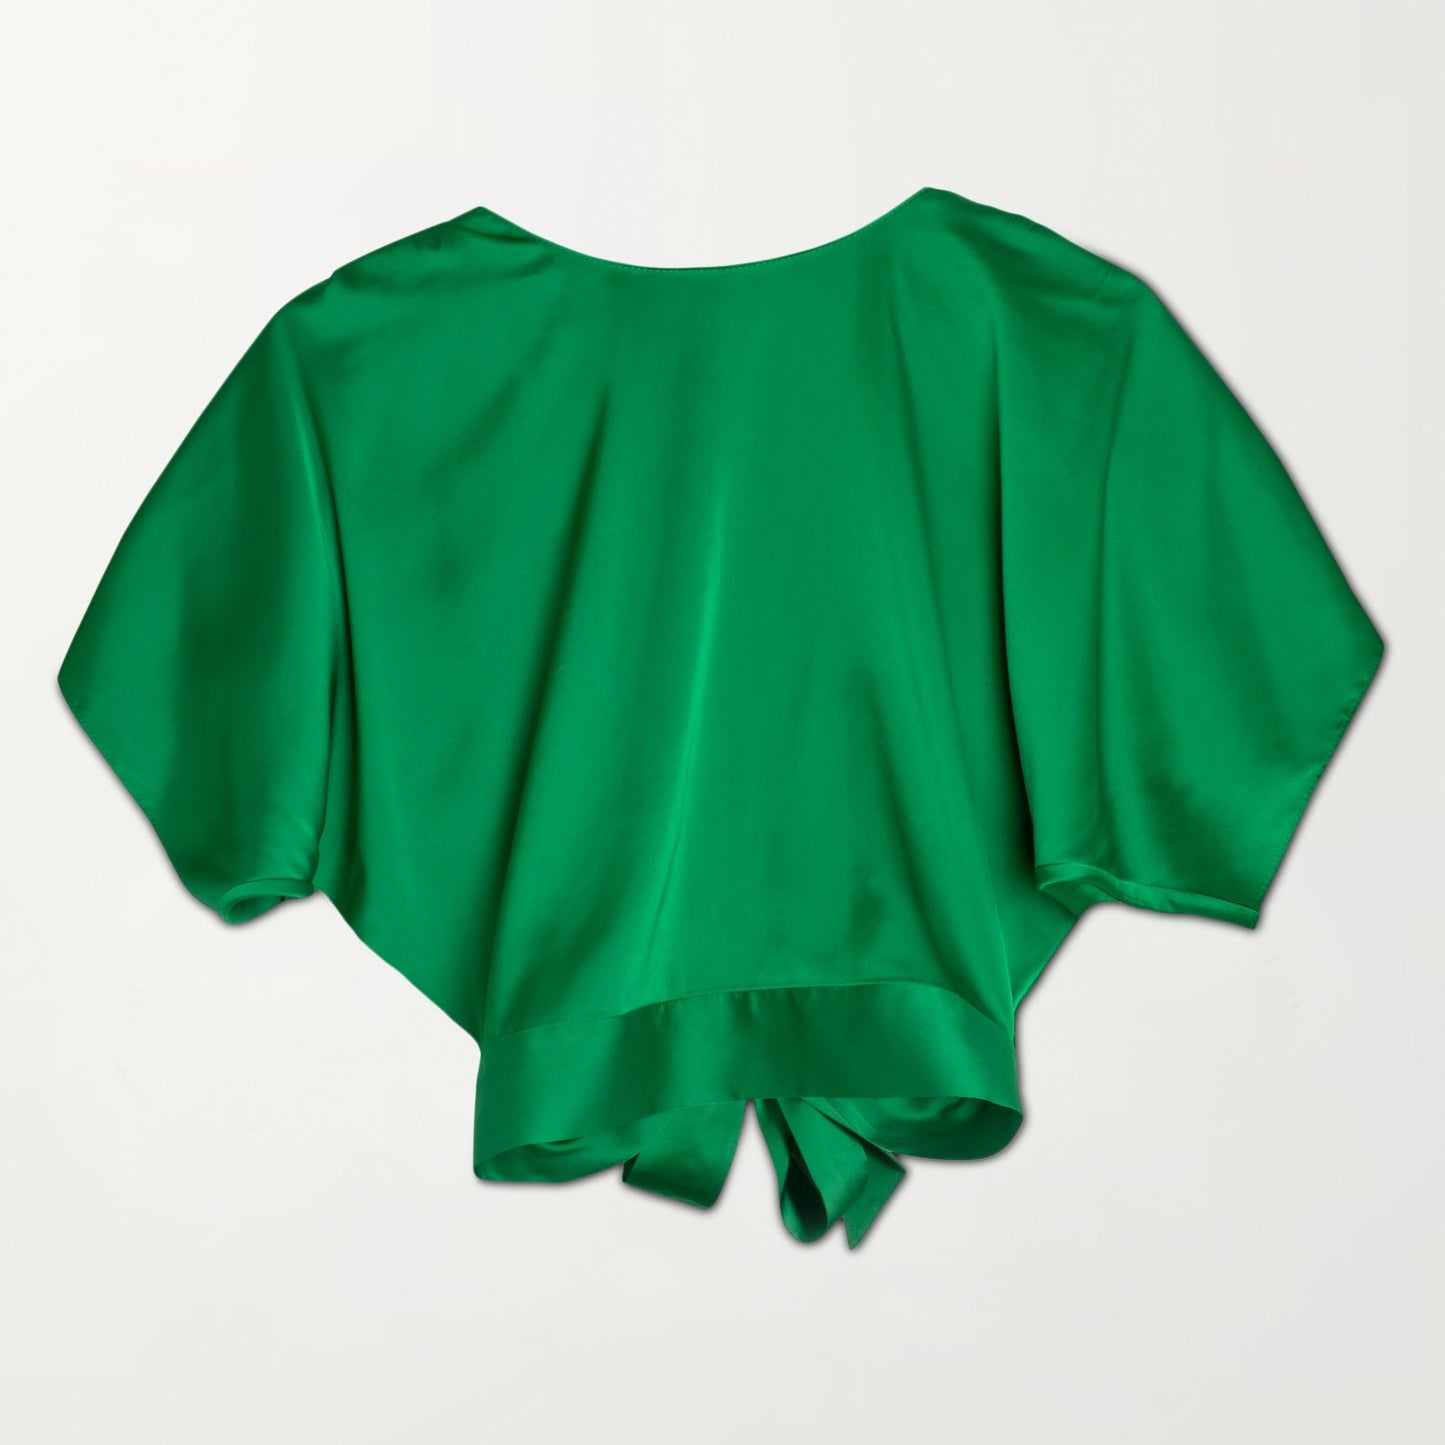 The Lala Top in Emerald